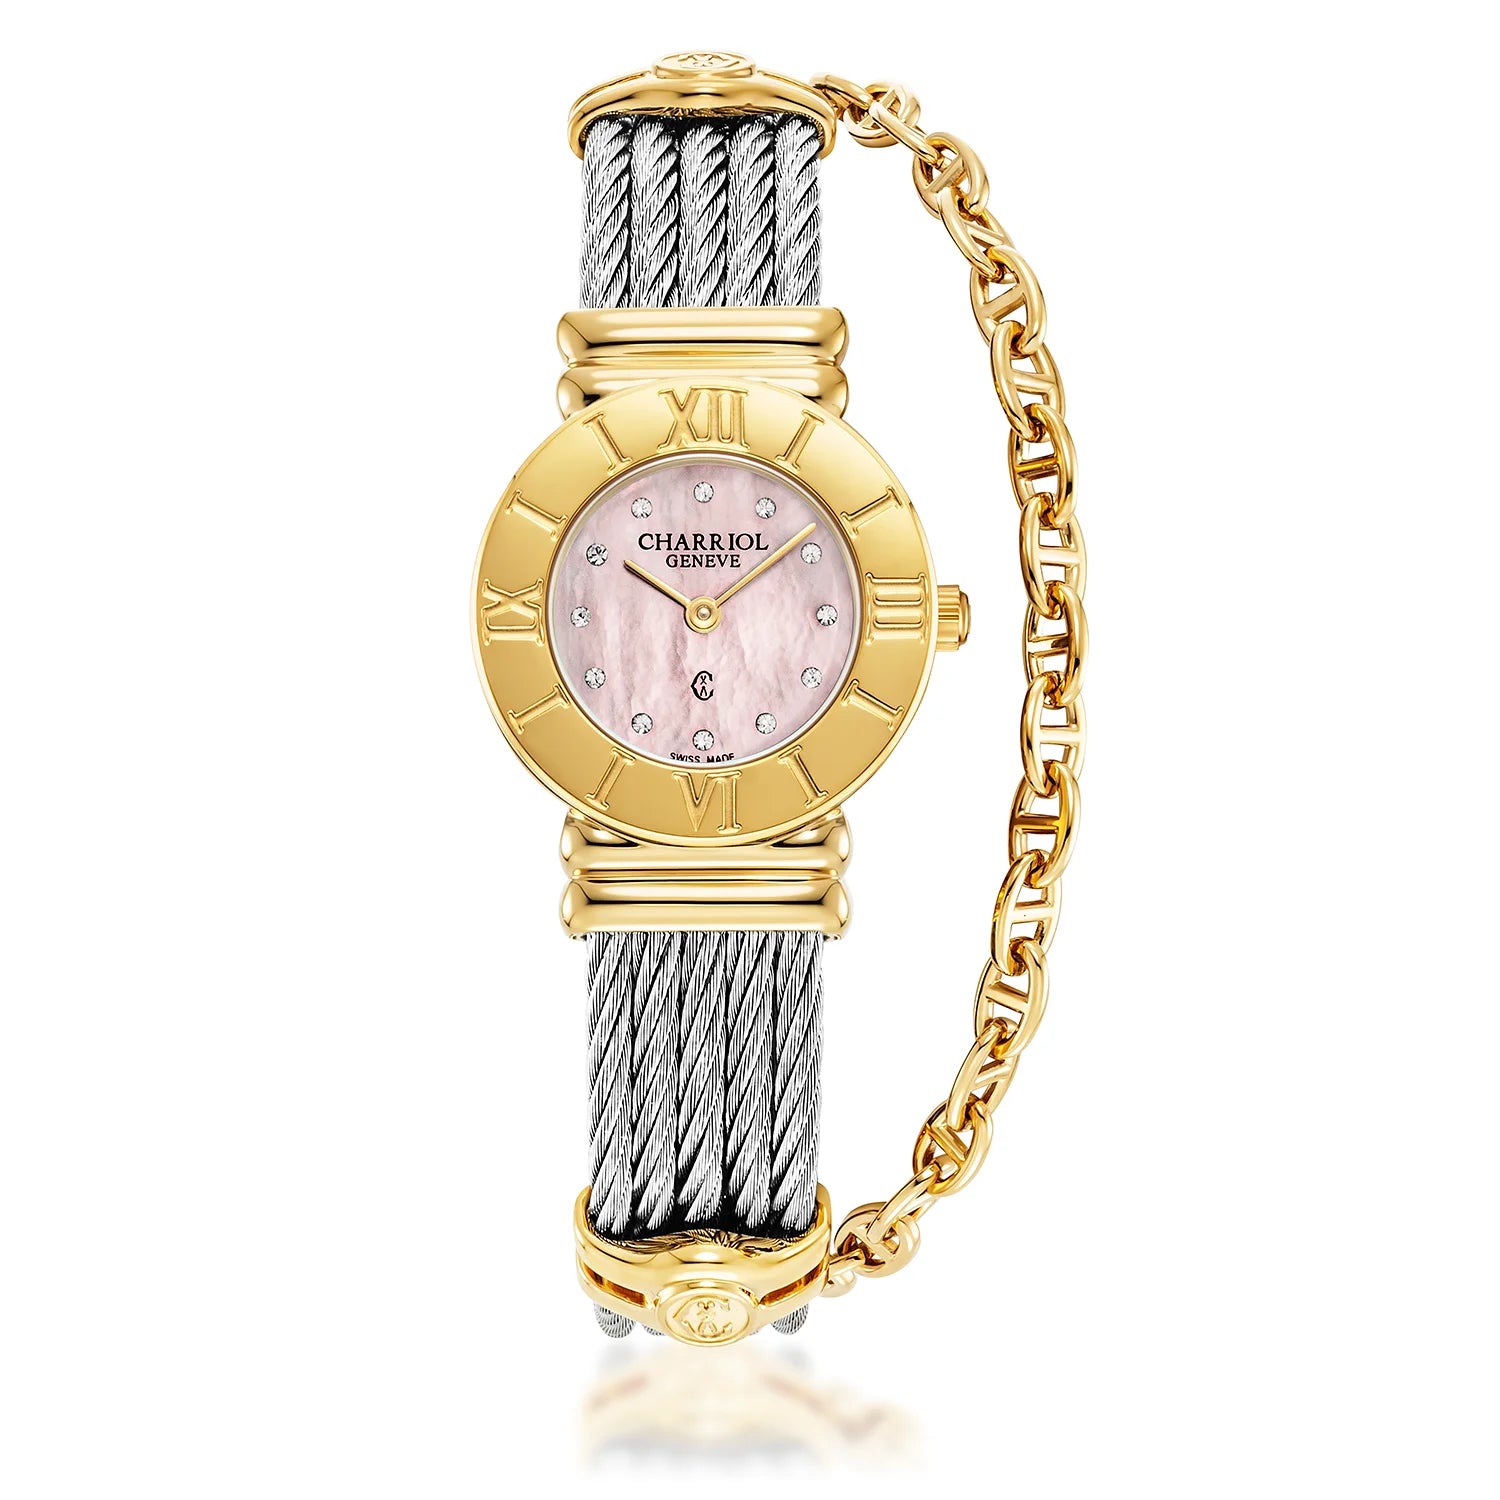 St Tropez Icon 24.5mm Watch Yellow Gold, Steel Cable, Roman Number Bezel and 12 Diamonds Pink MOP Dial - Charriol Geneve -  Watch